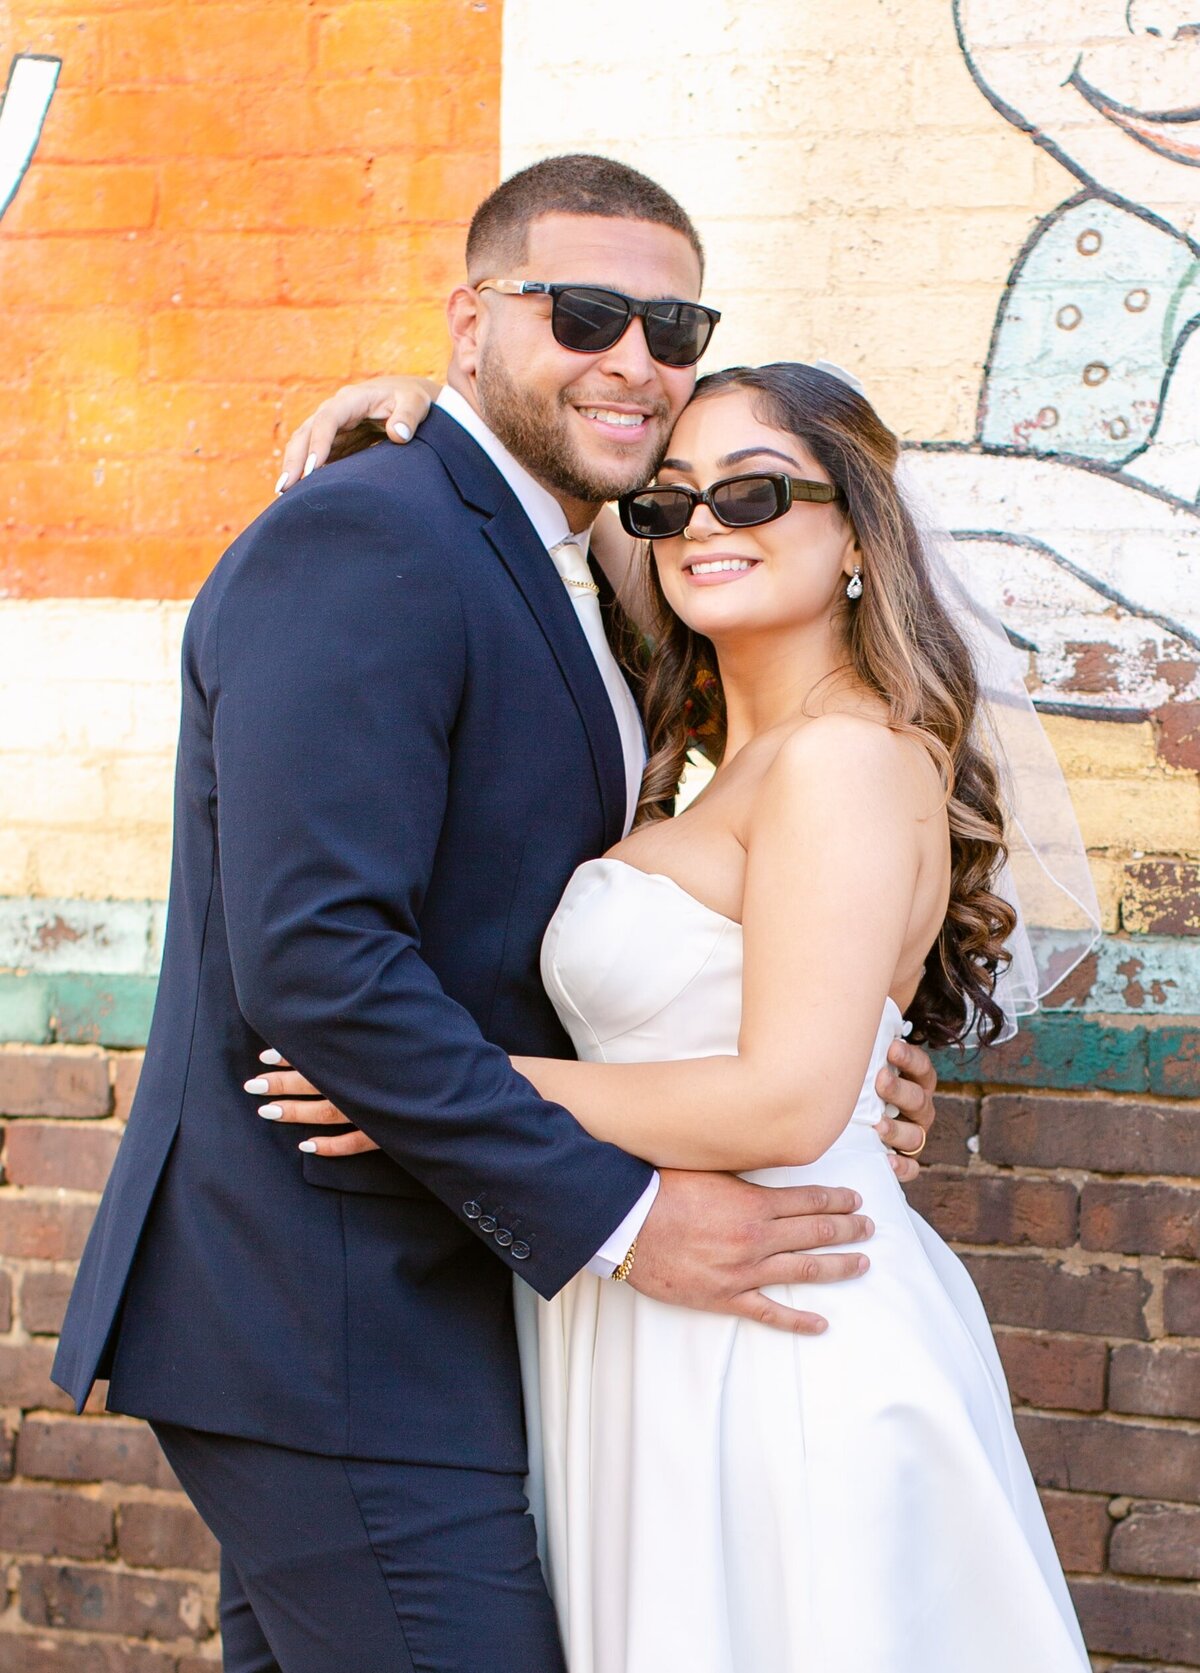 Bride and Groom with sunglasses on in front of brick wall in Culpeper, Virginia.